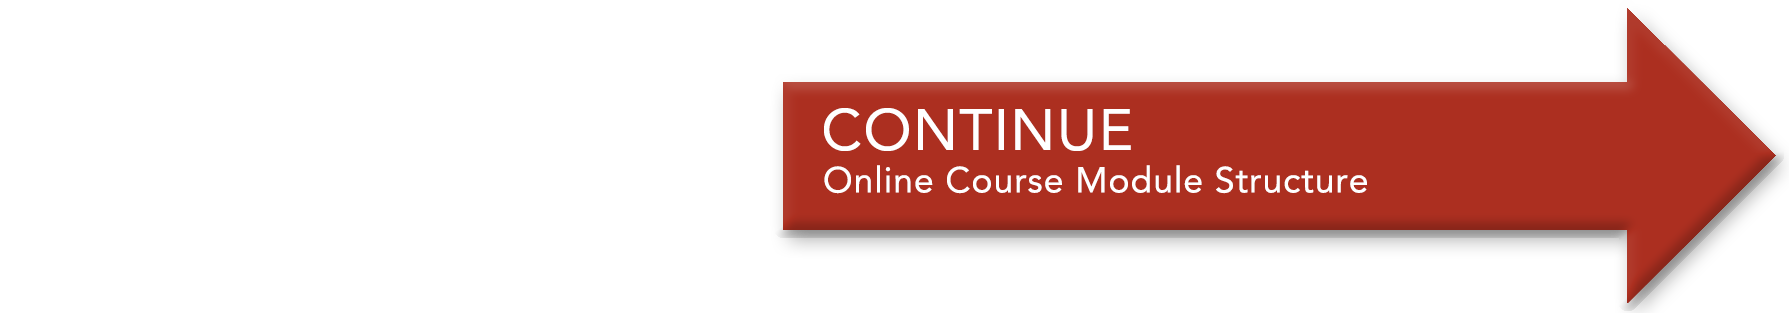 Continue to Online Course Module Structure